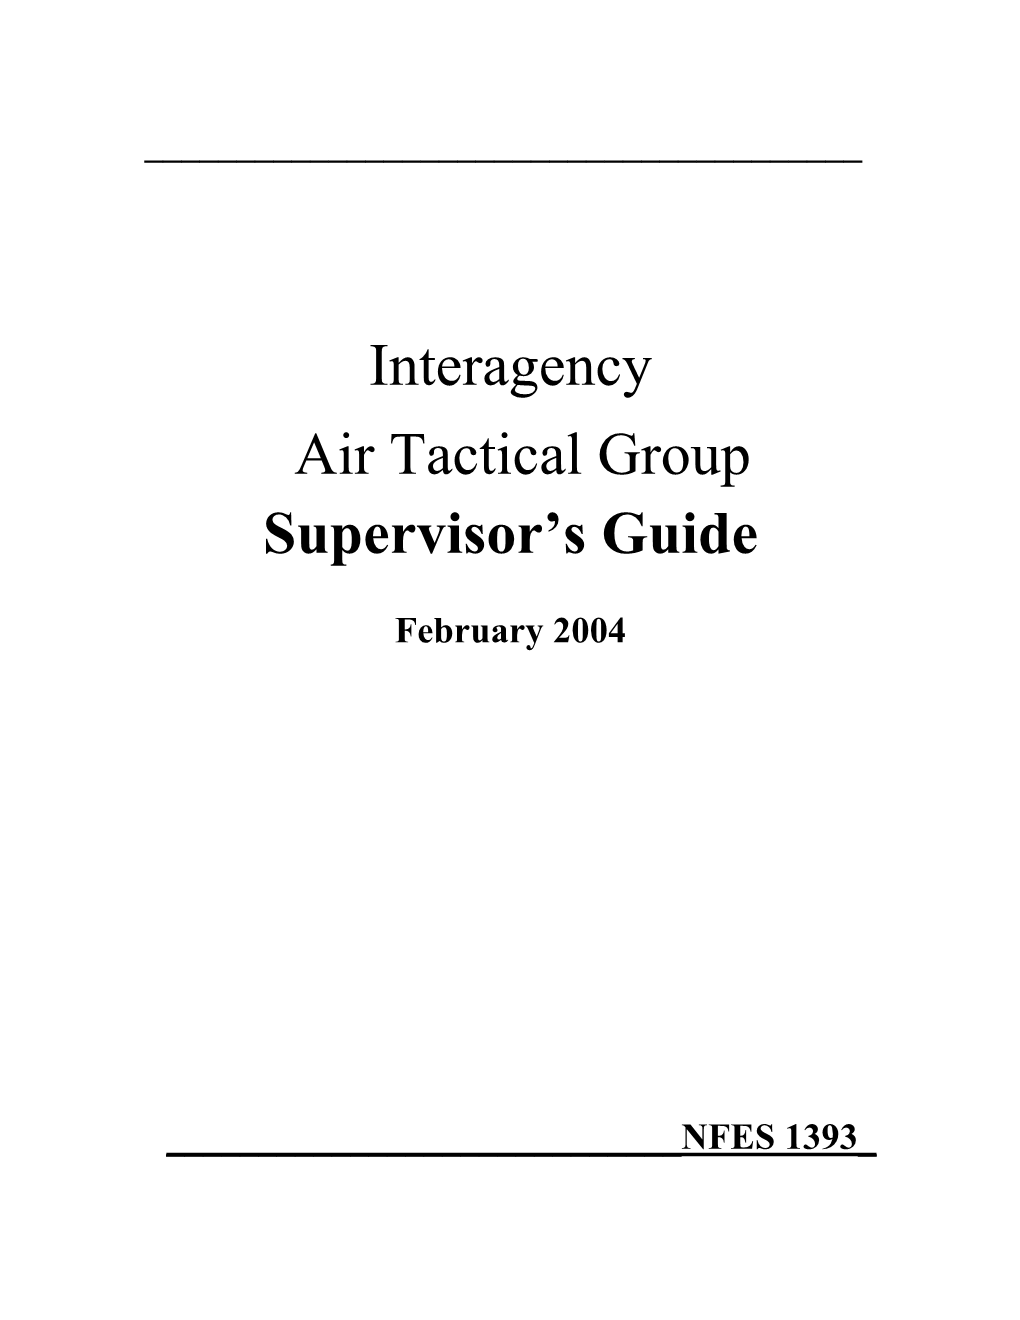 Interagency Air Tactical Group Supervisor's Guide